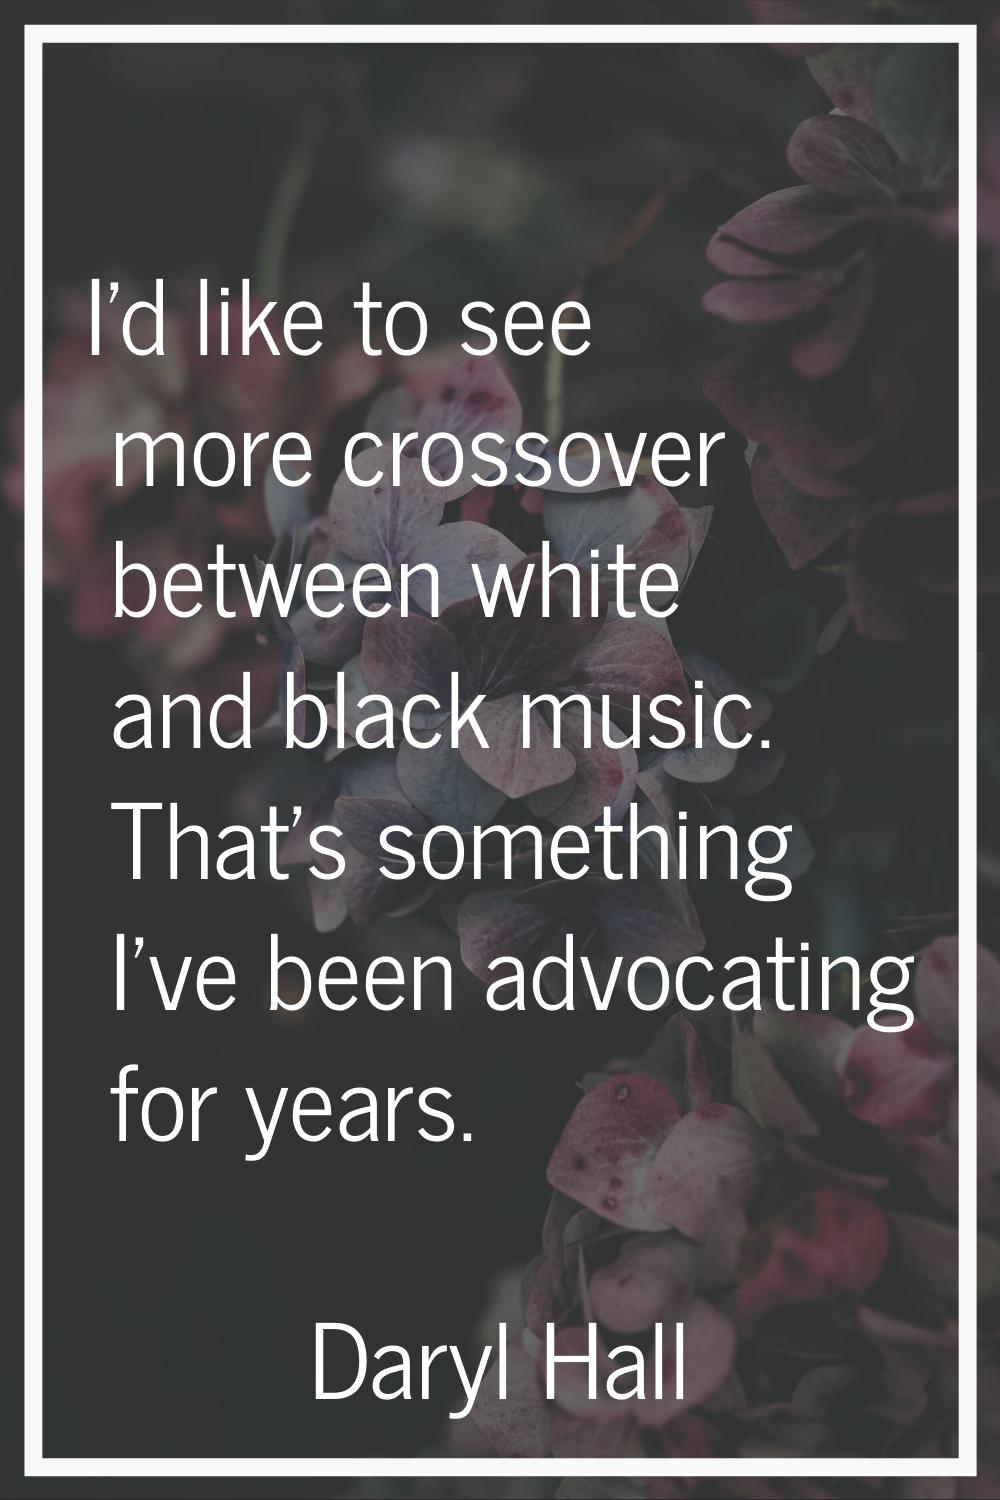 I'd like to see more crossover between white and black music. That's something I've been advocating